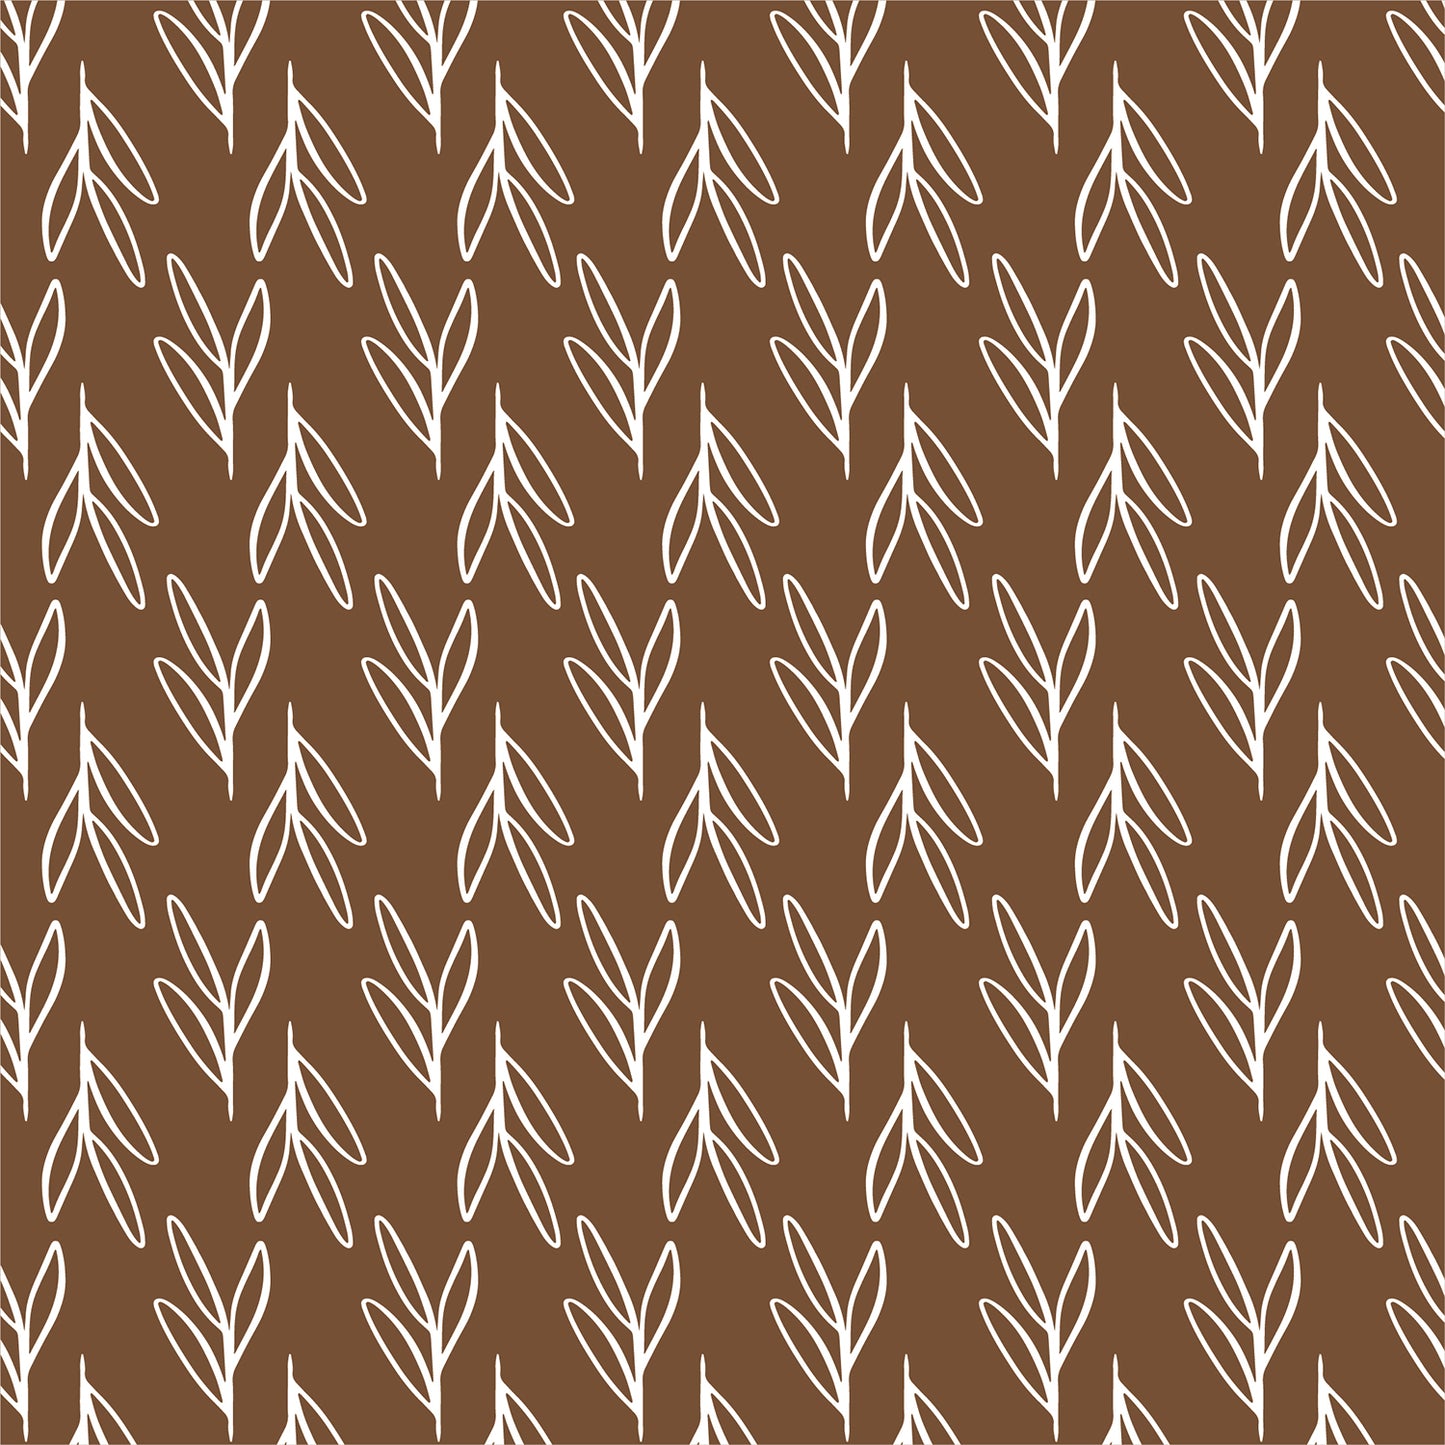 Boho Leaf in Brown Flat Wrapping Paper Sheet Wholesale Wraphaholic